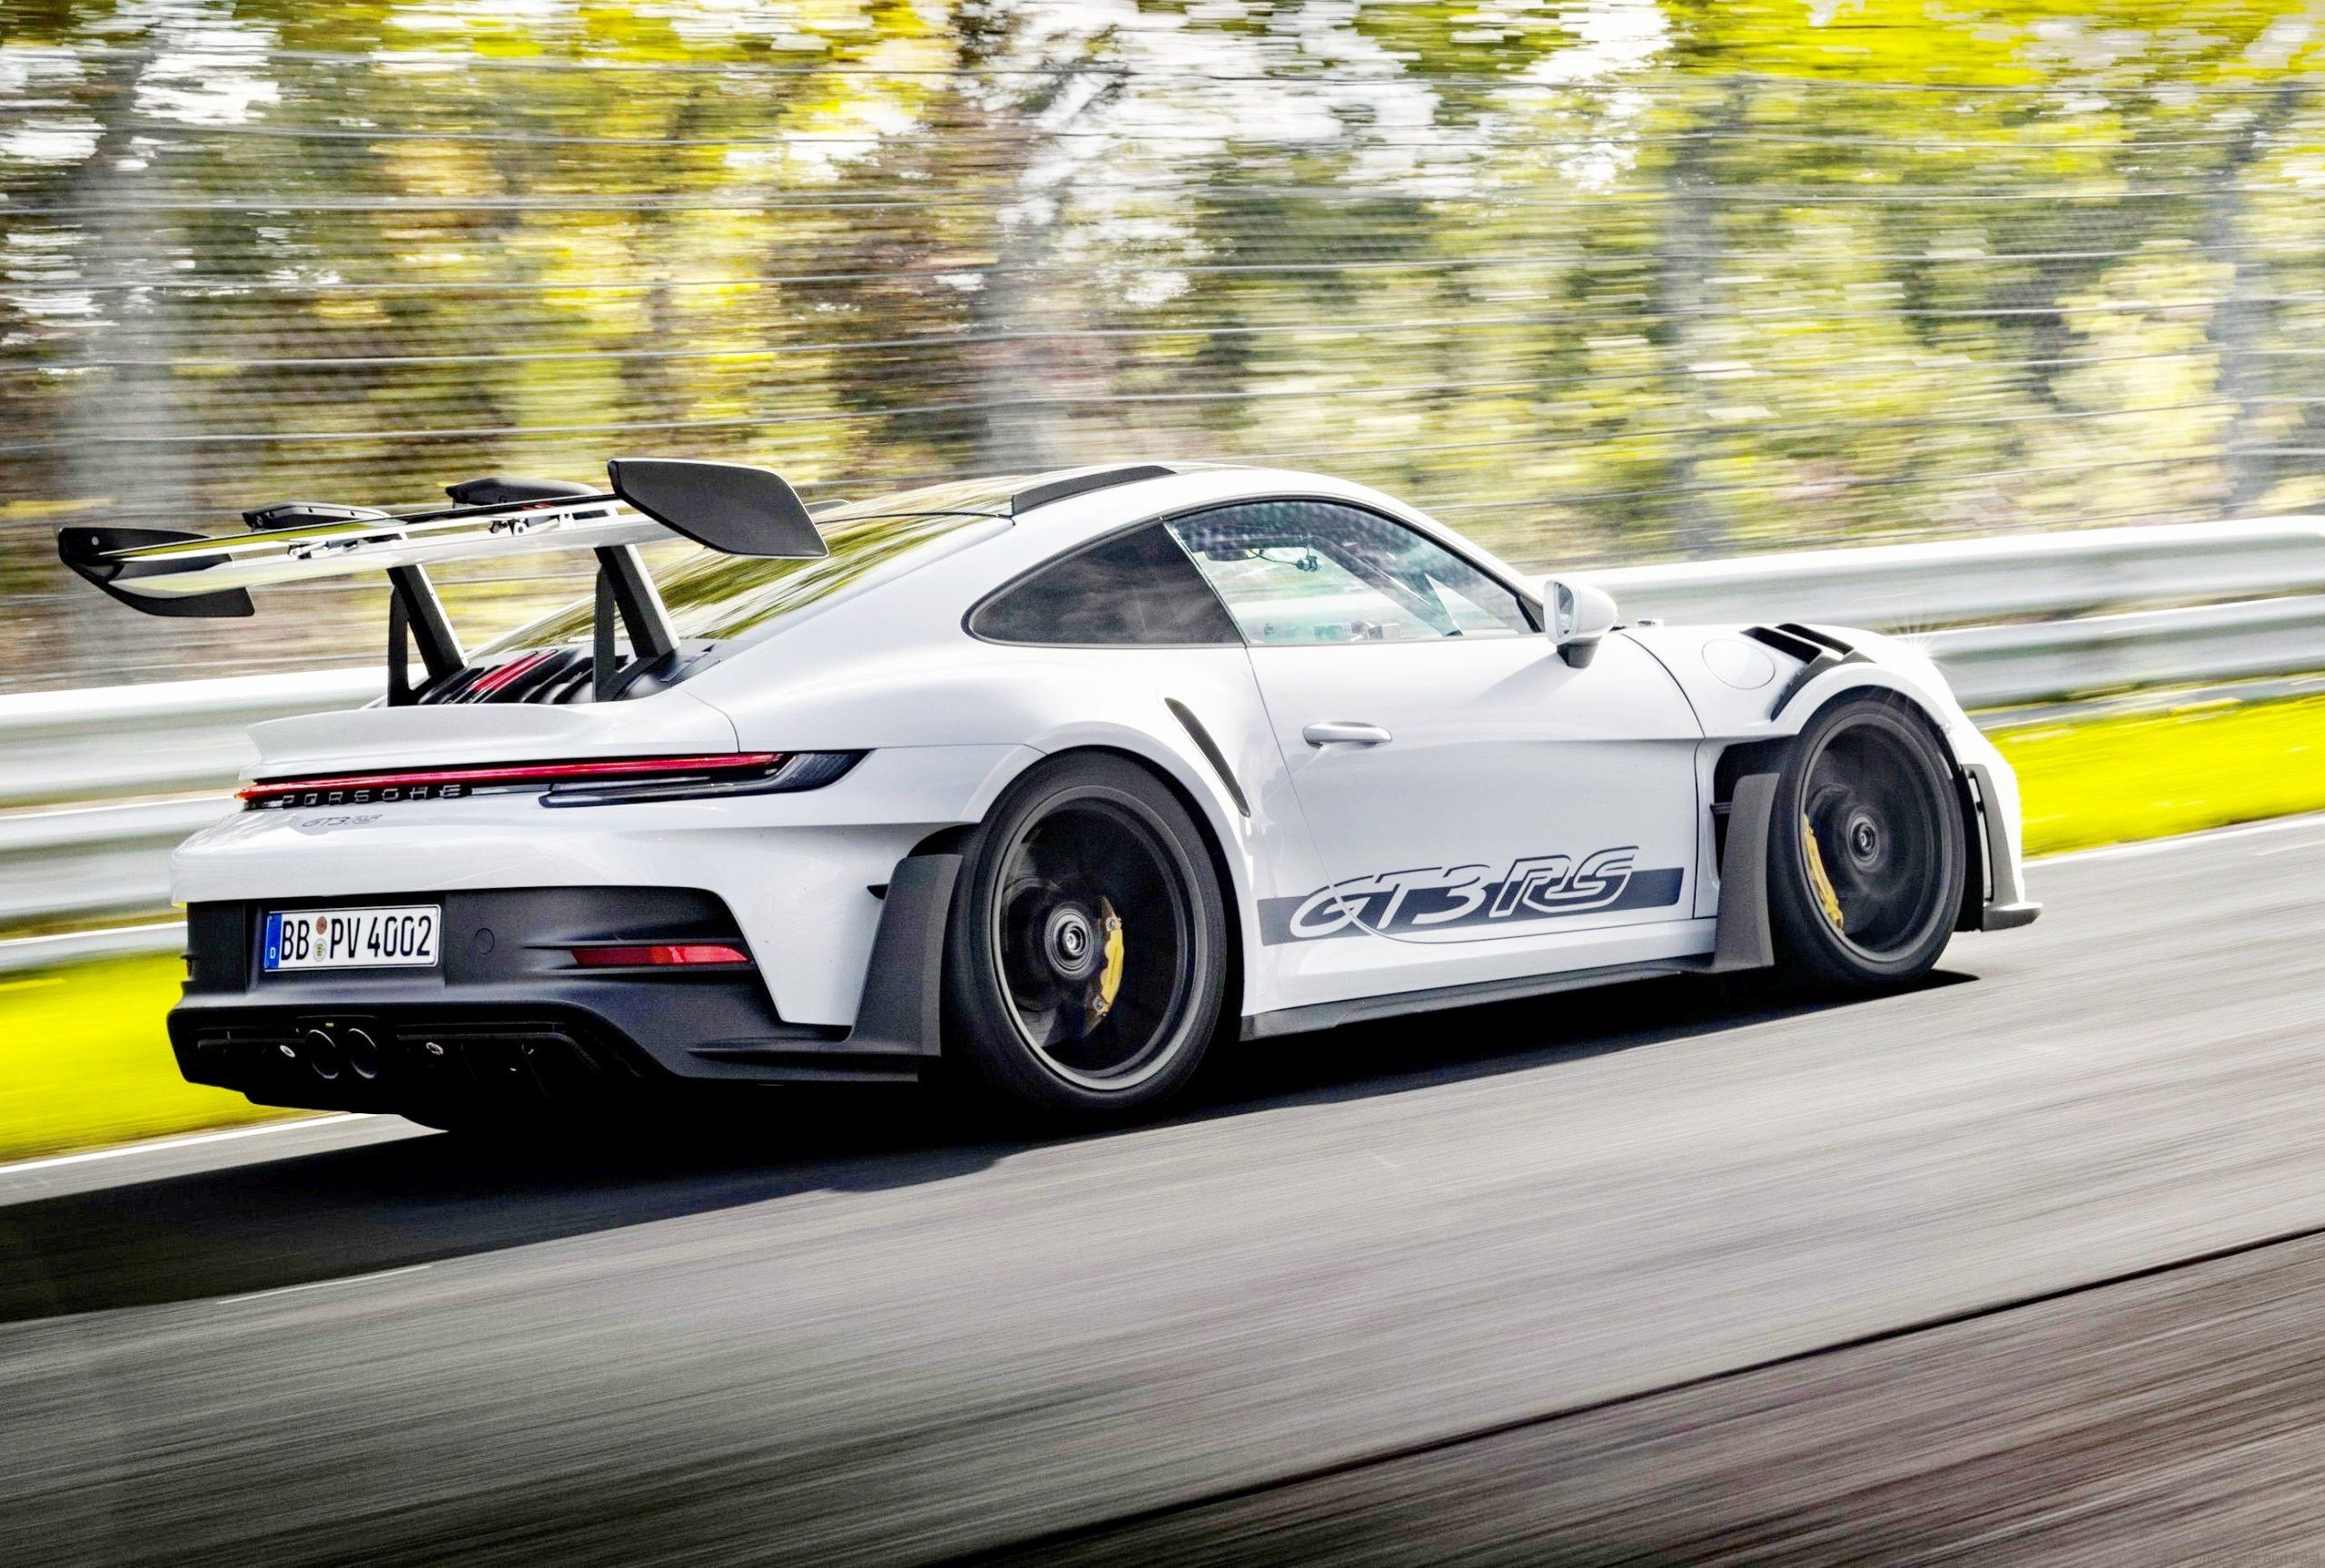 On MICHELIN tyres Porsche 911 GT3 RS laps the Nordschleife in only 6:49.328  minutes